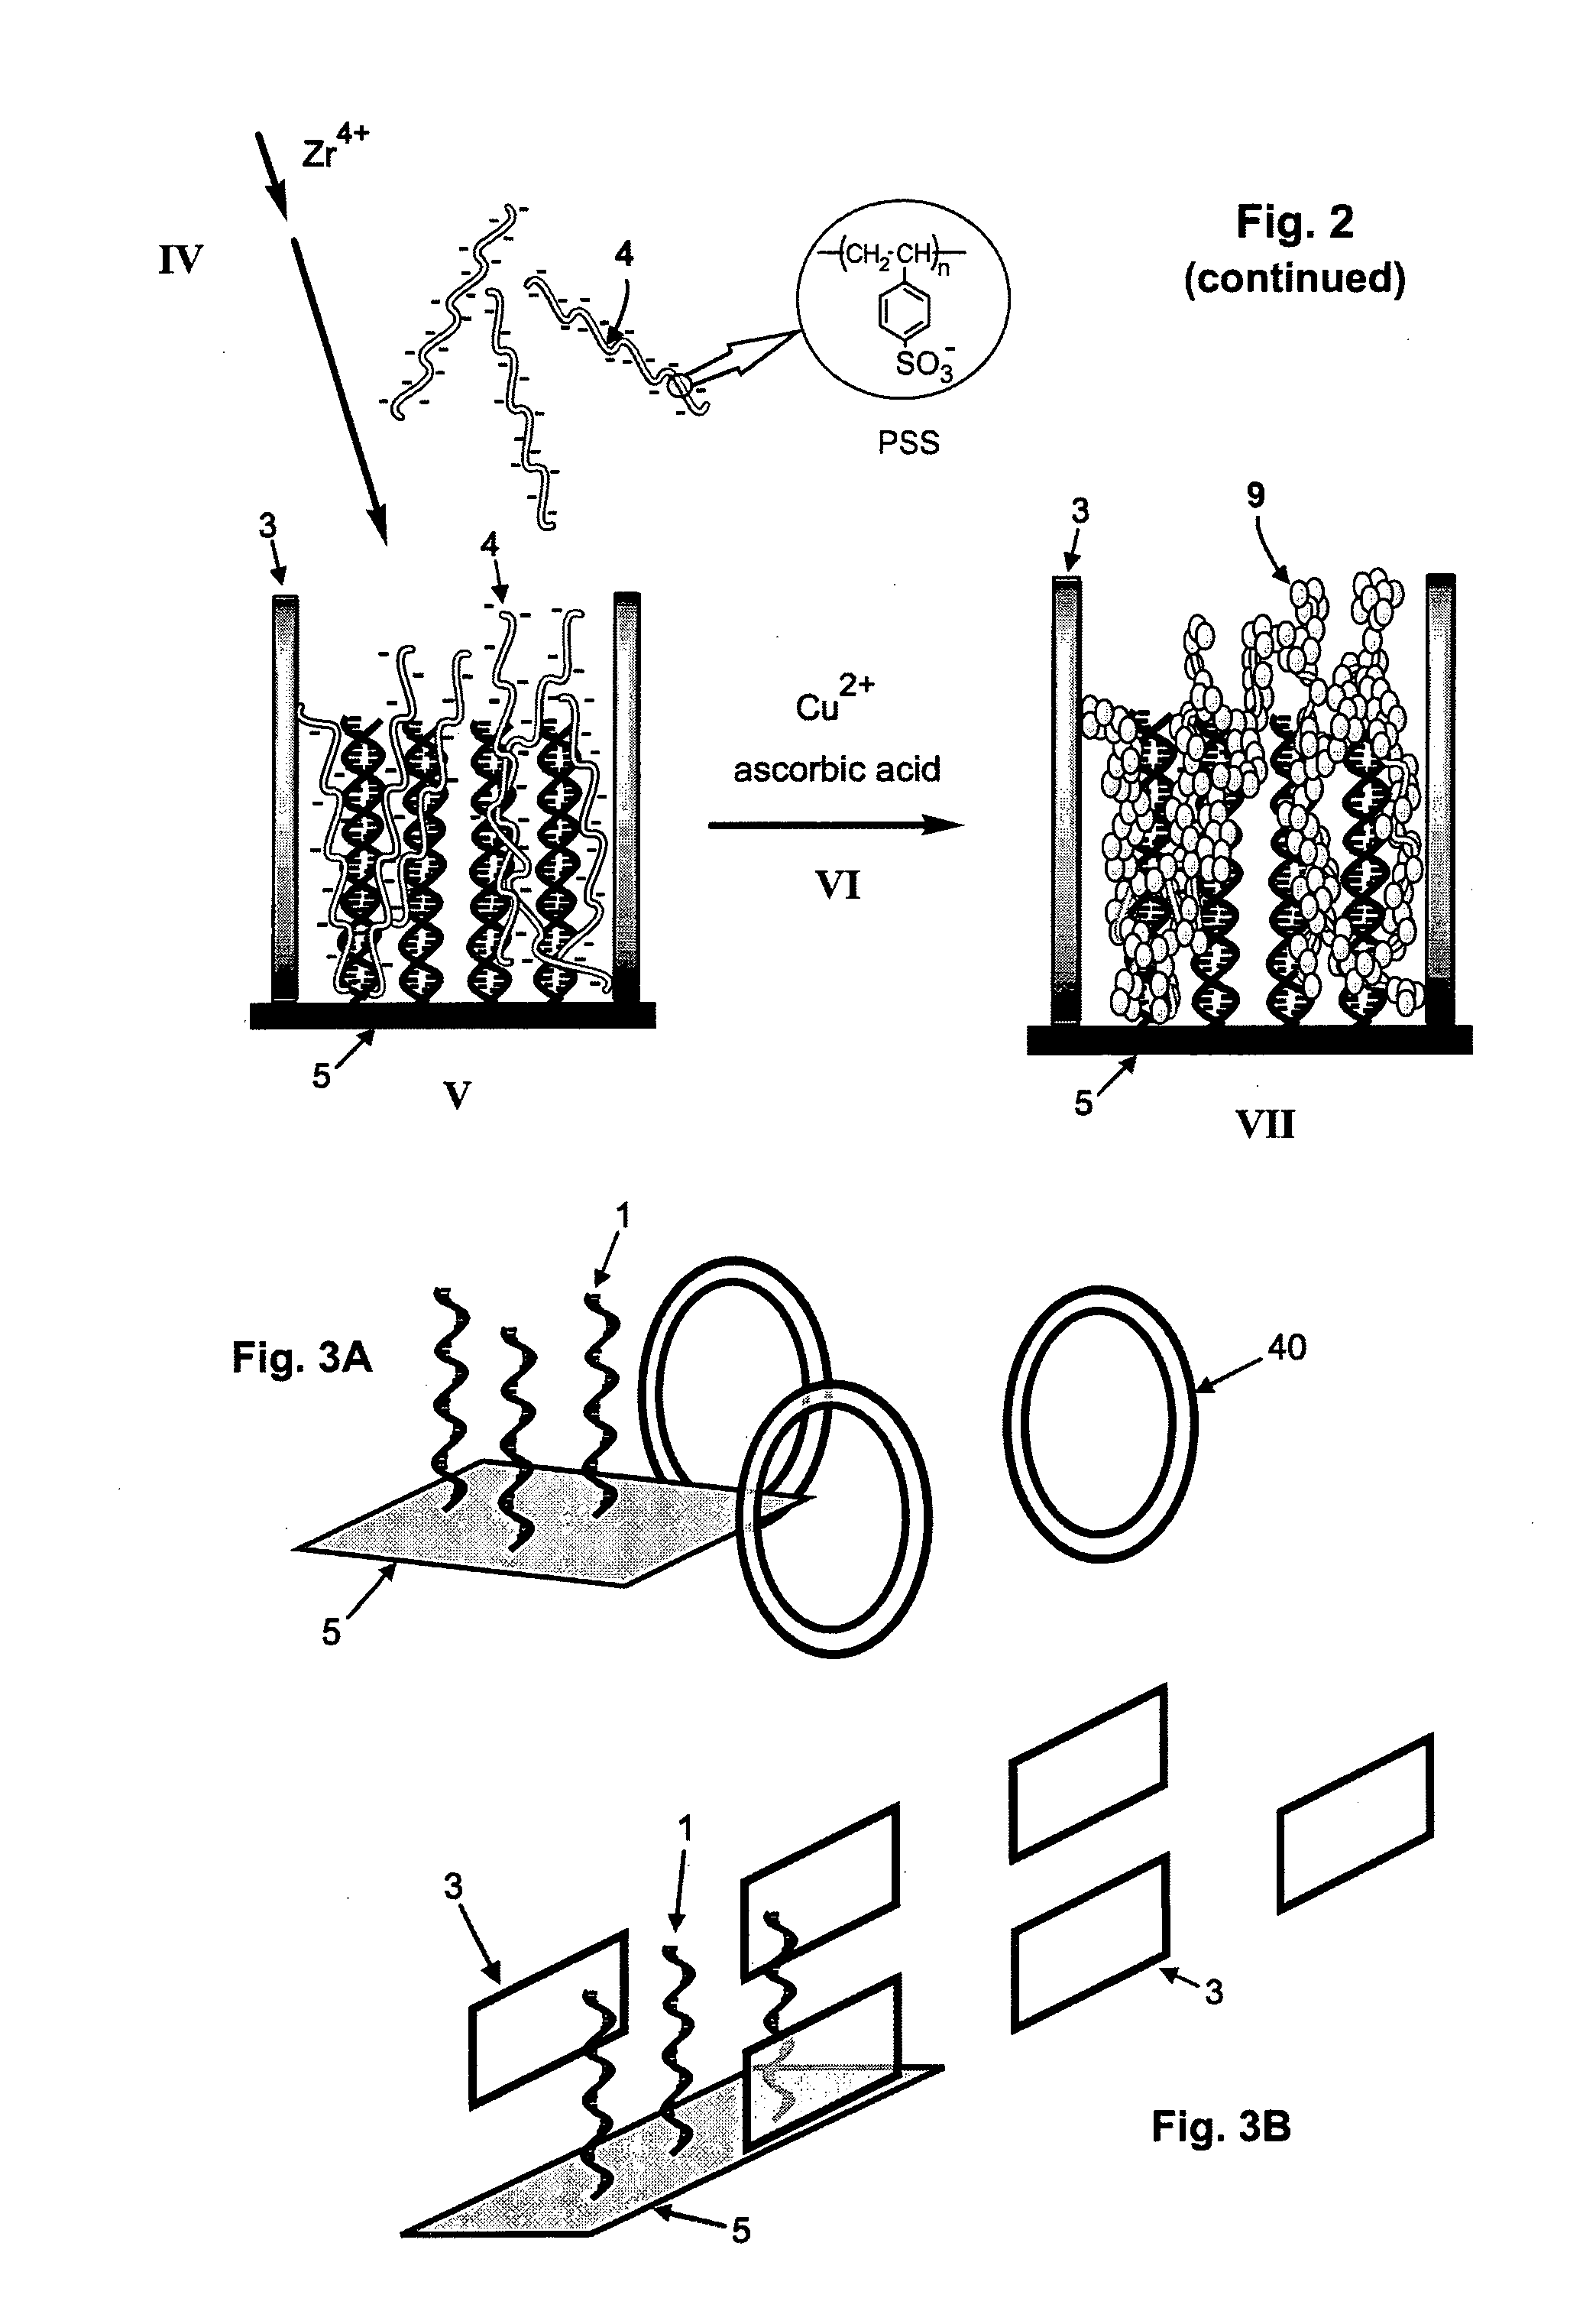 Method of electrically detecting a nucleic acid molecule